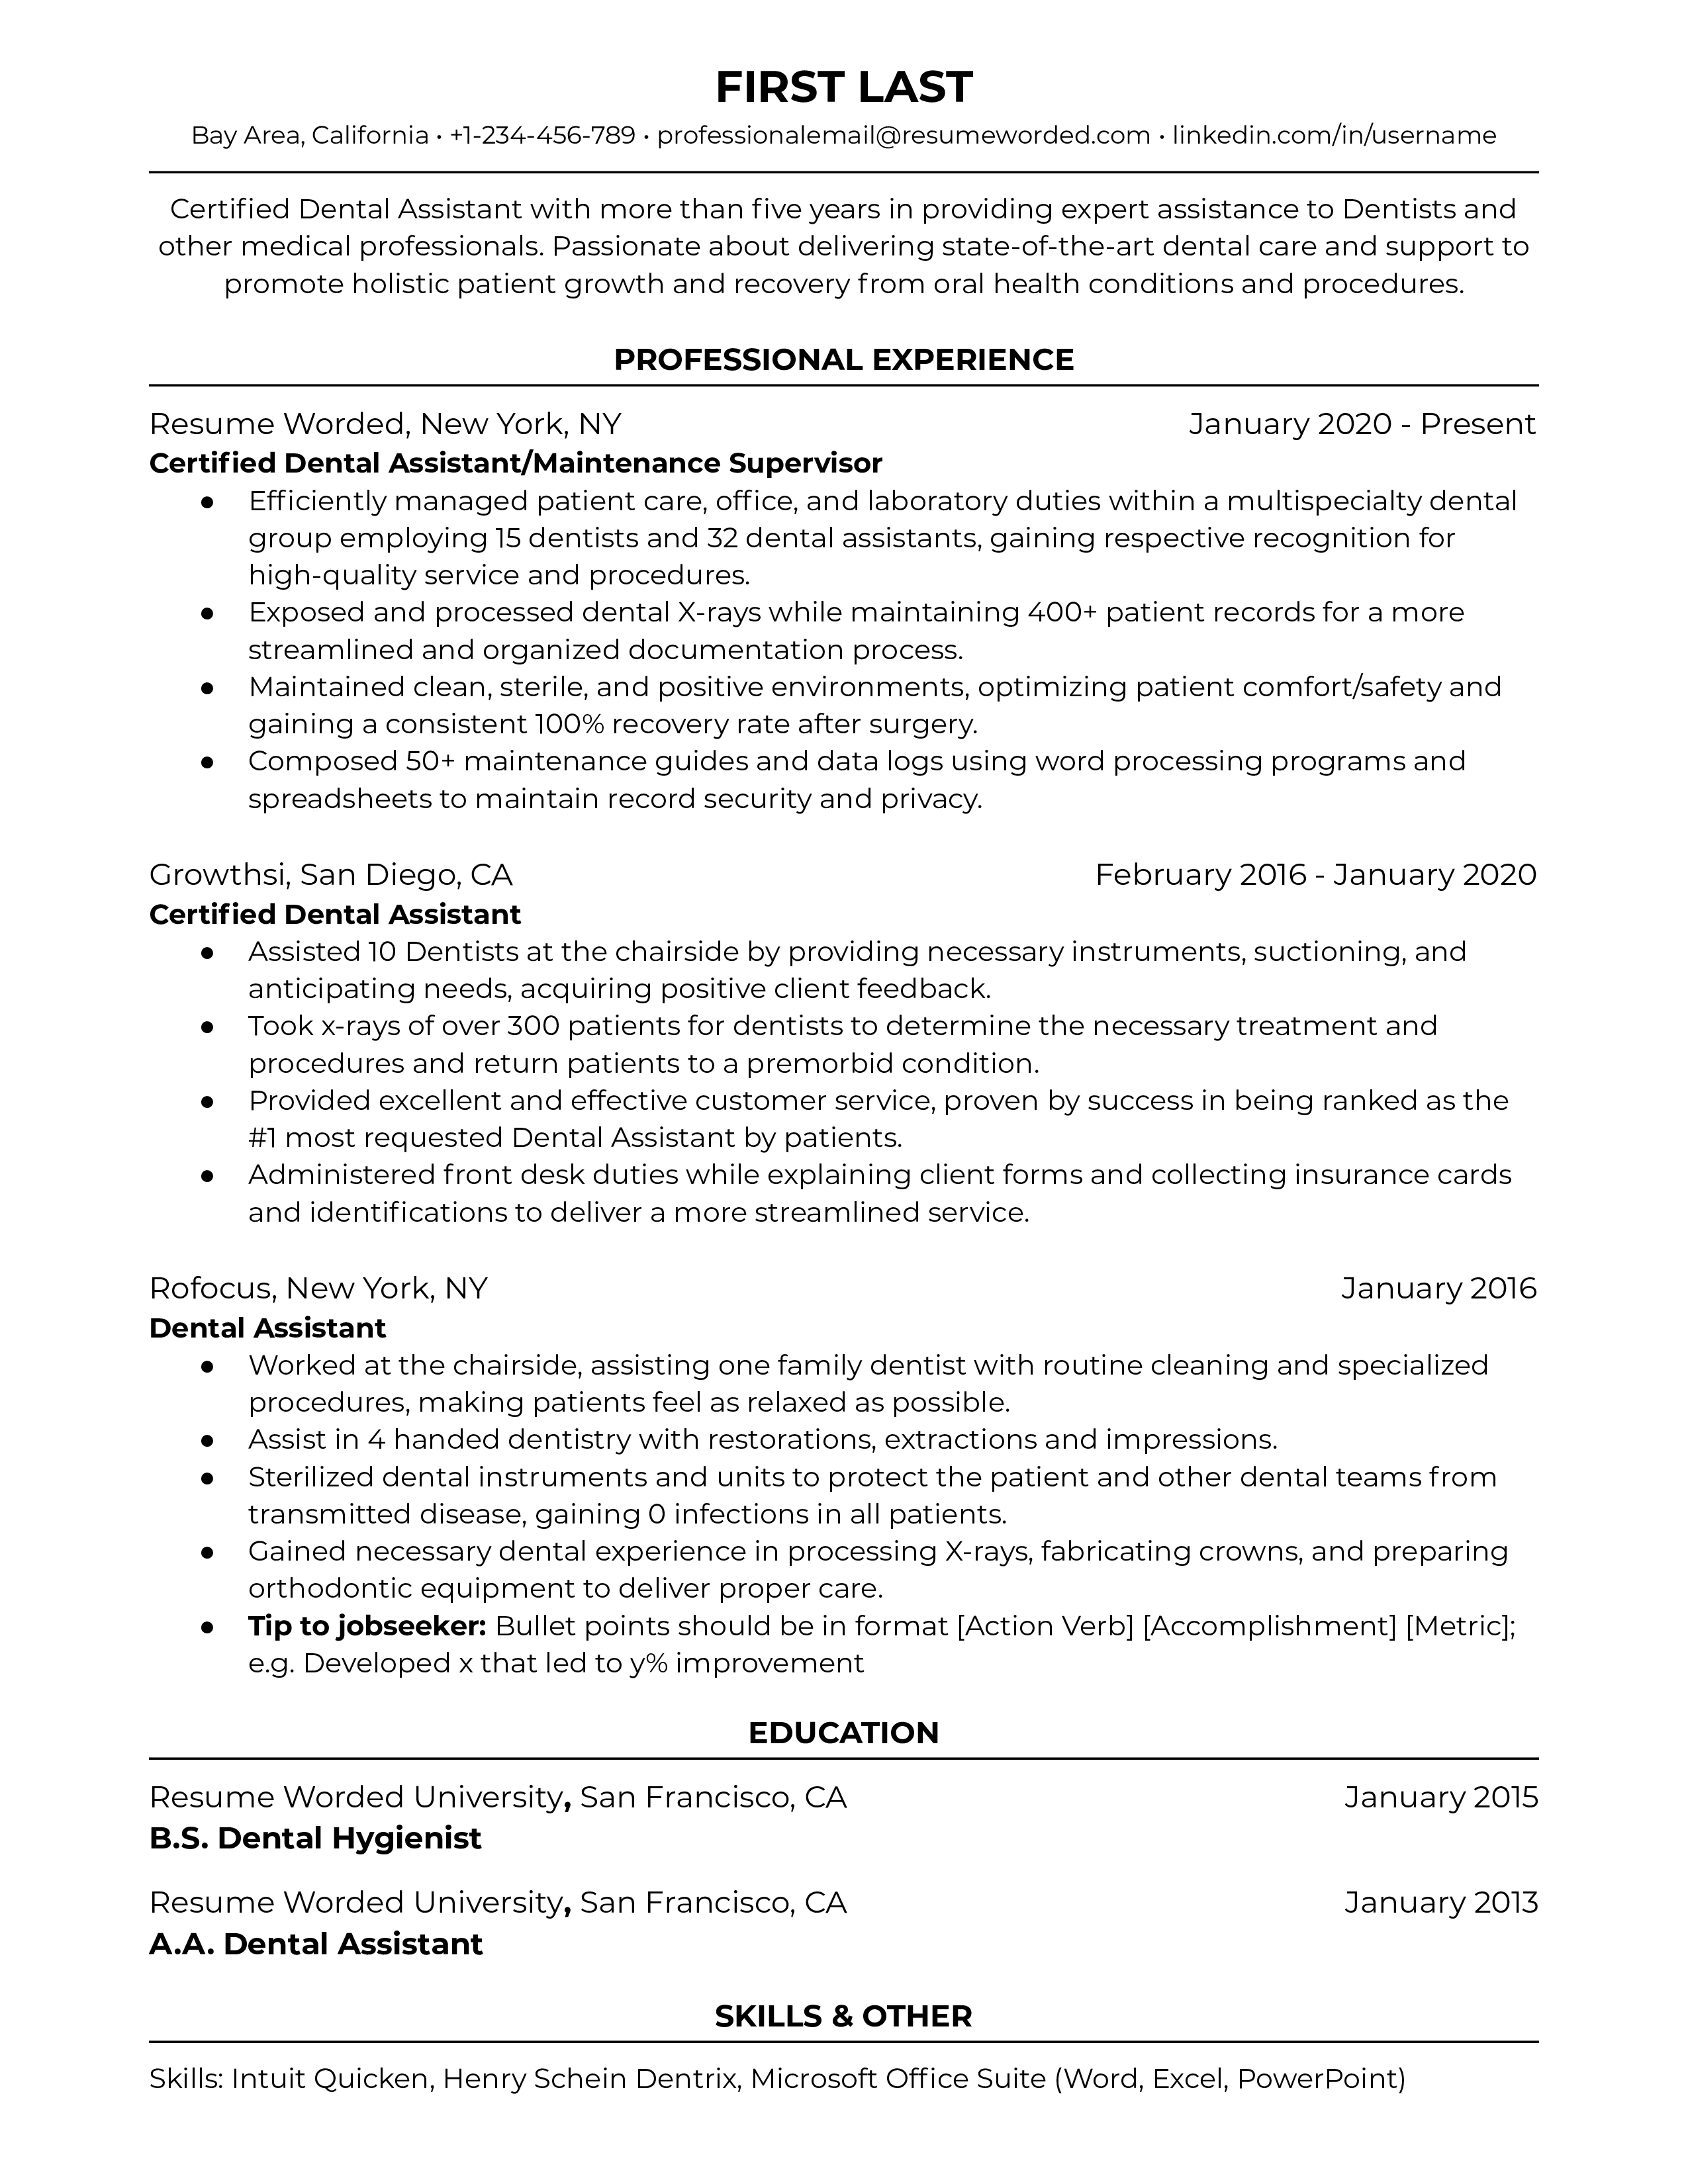 Certified Dental Assistant resume example